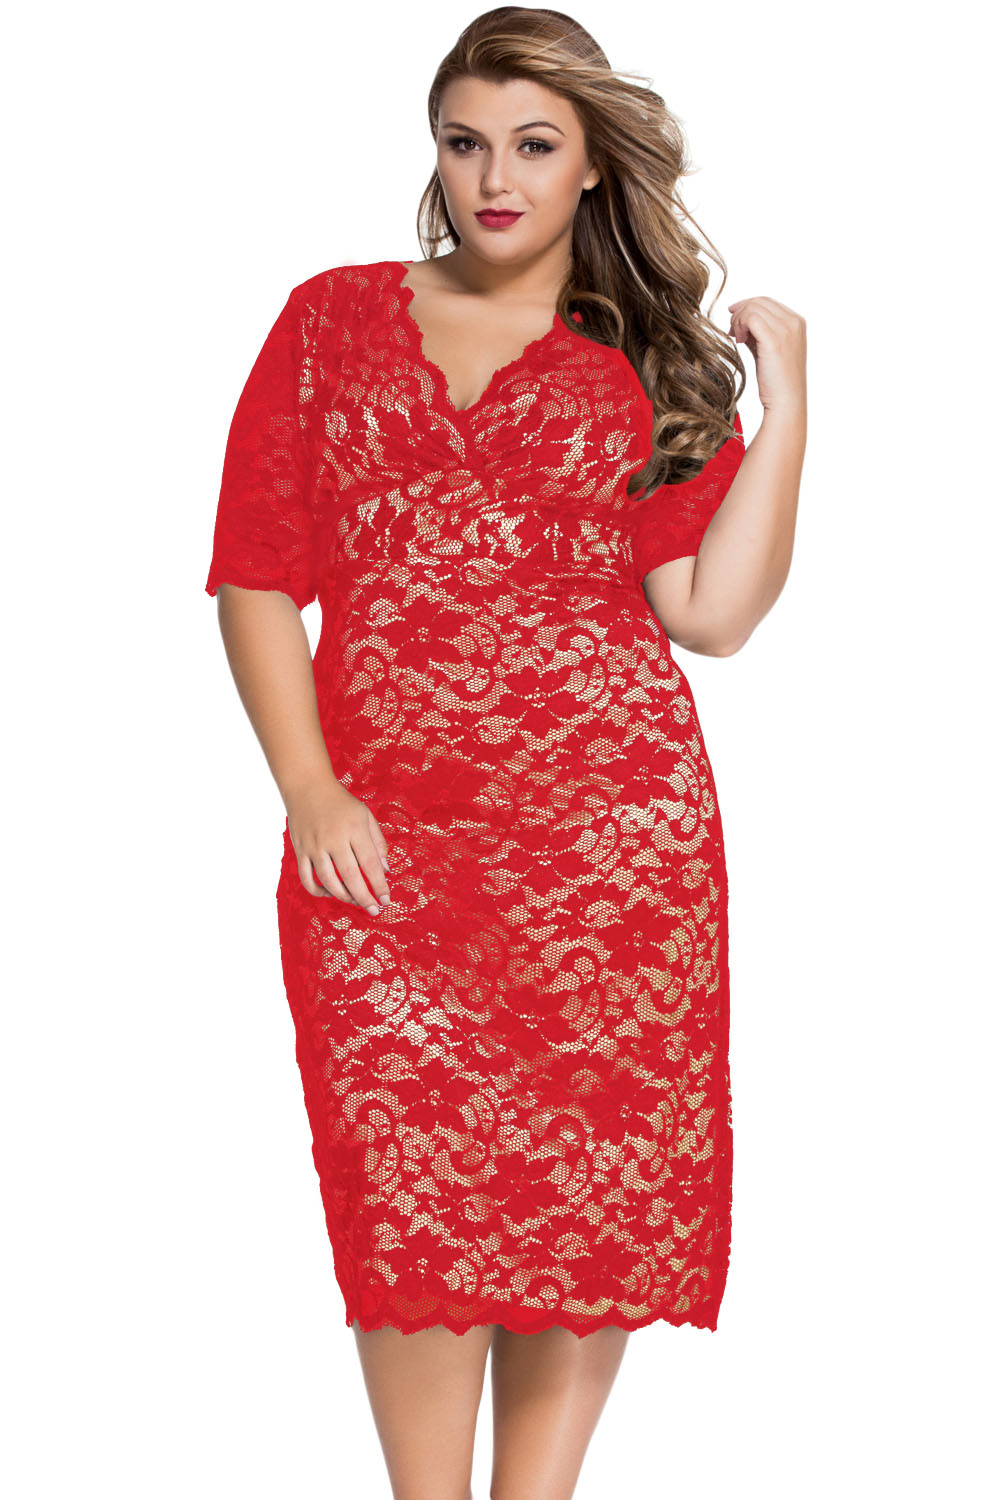 Red Plus Size Dresses With Sleeves - Always In Vogue 2017